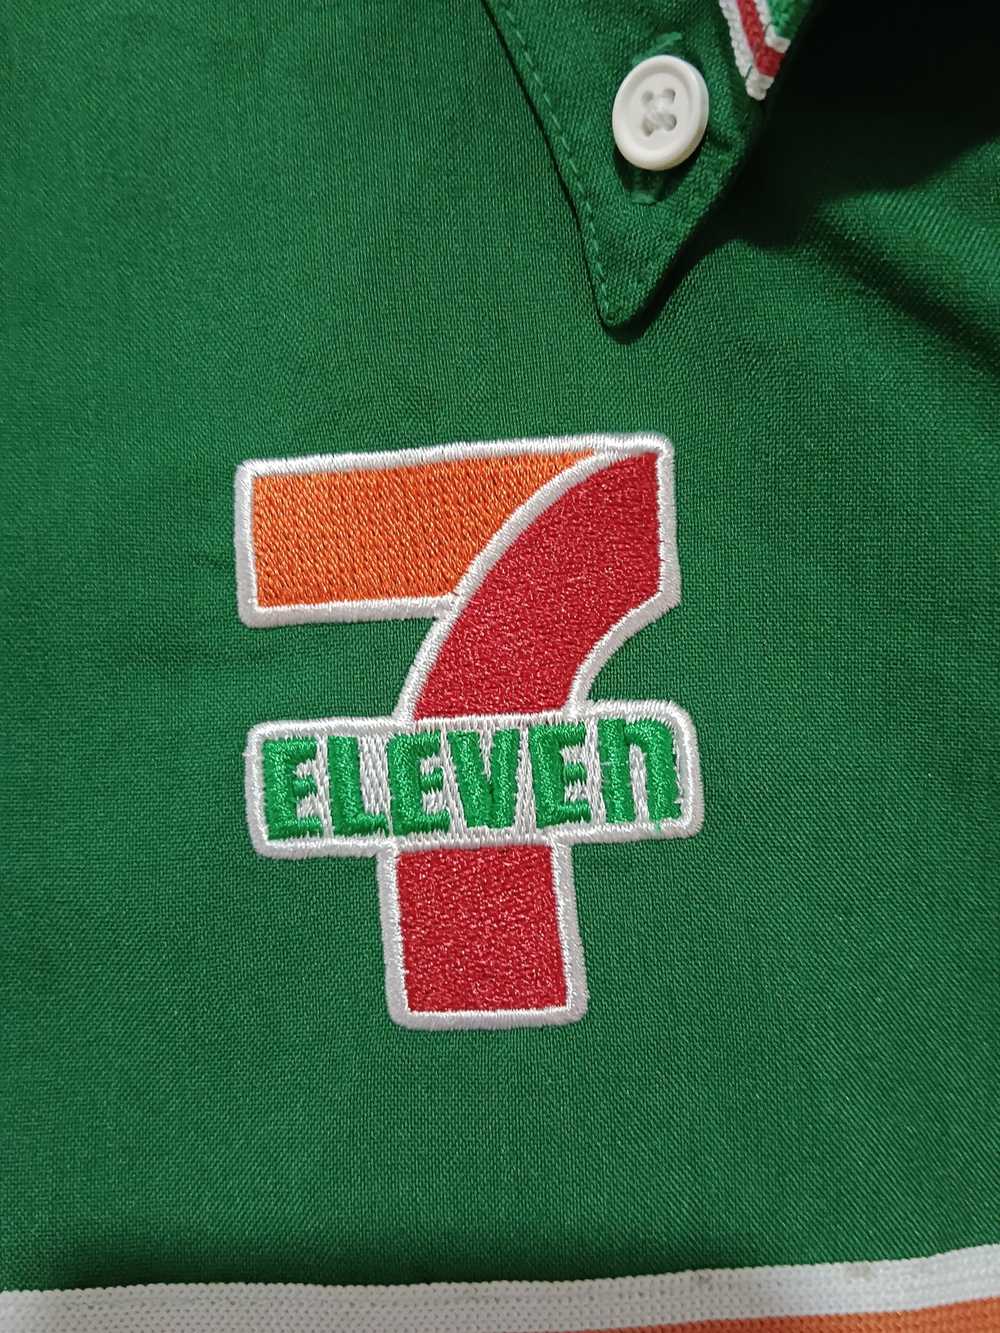 Workers 7 Eleven x worker shirt - image 7